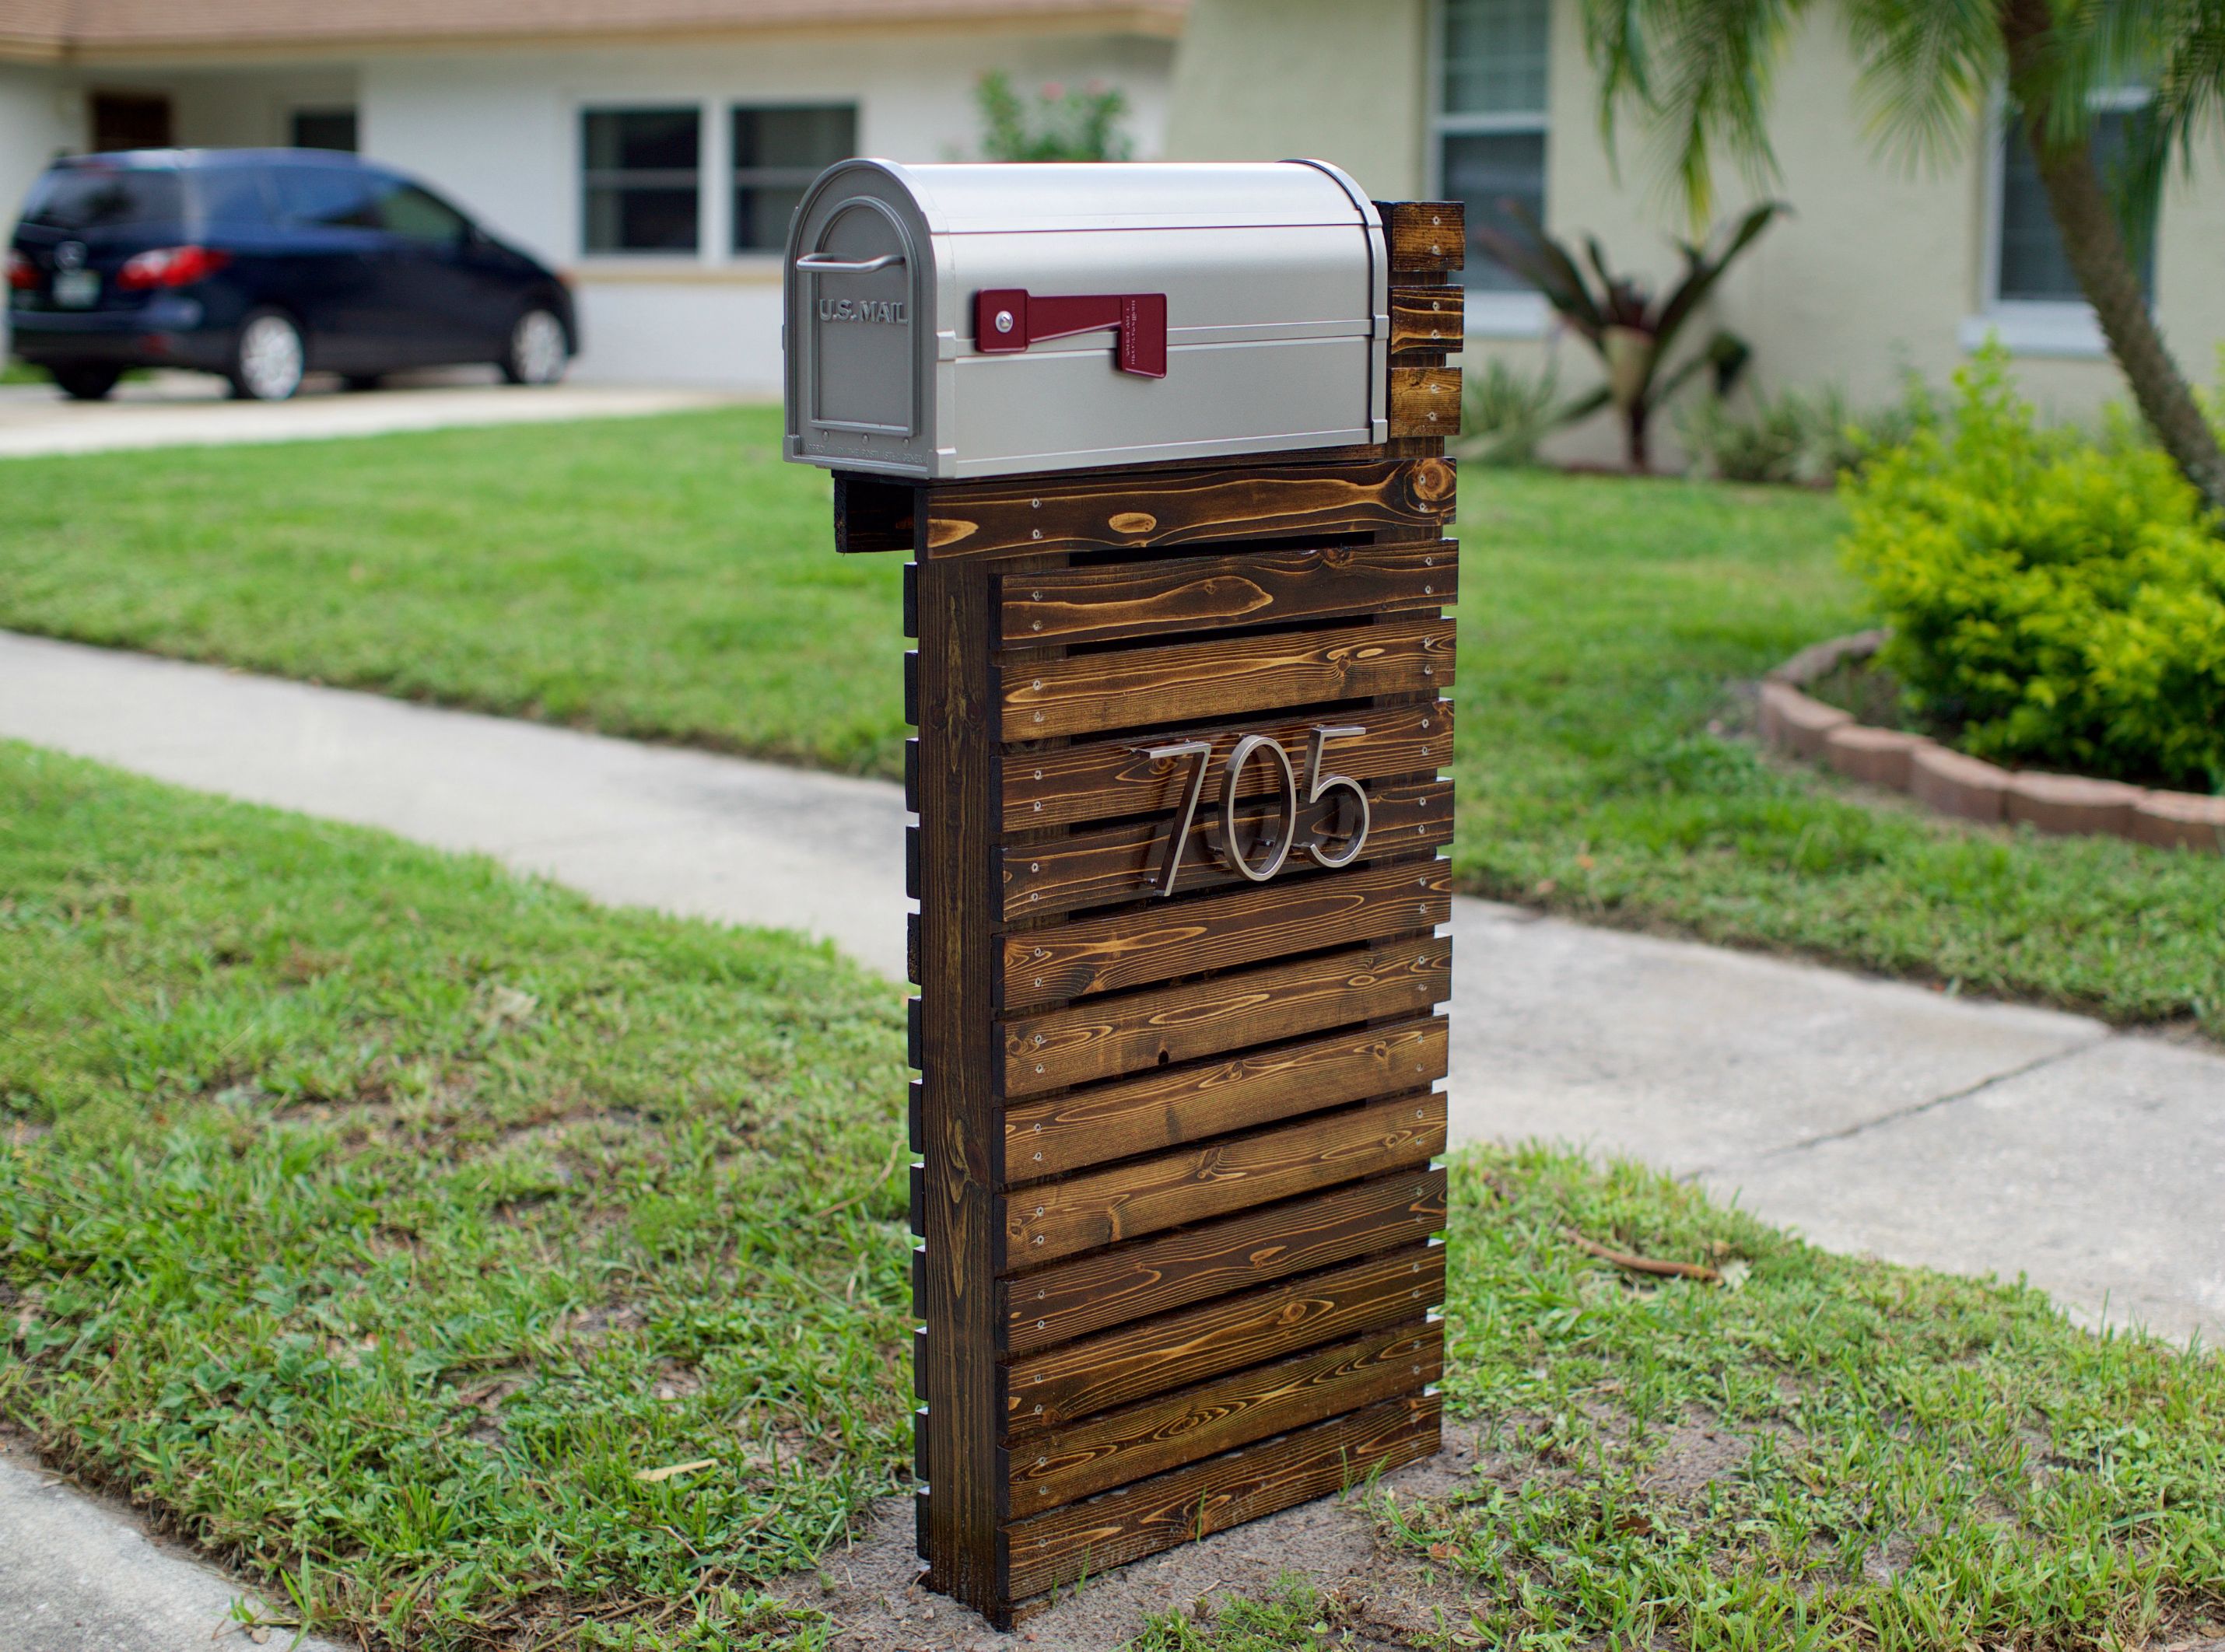 Tips on looking after your mailbox